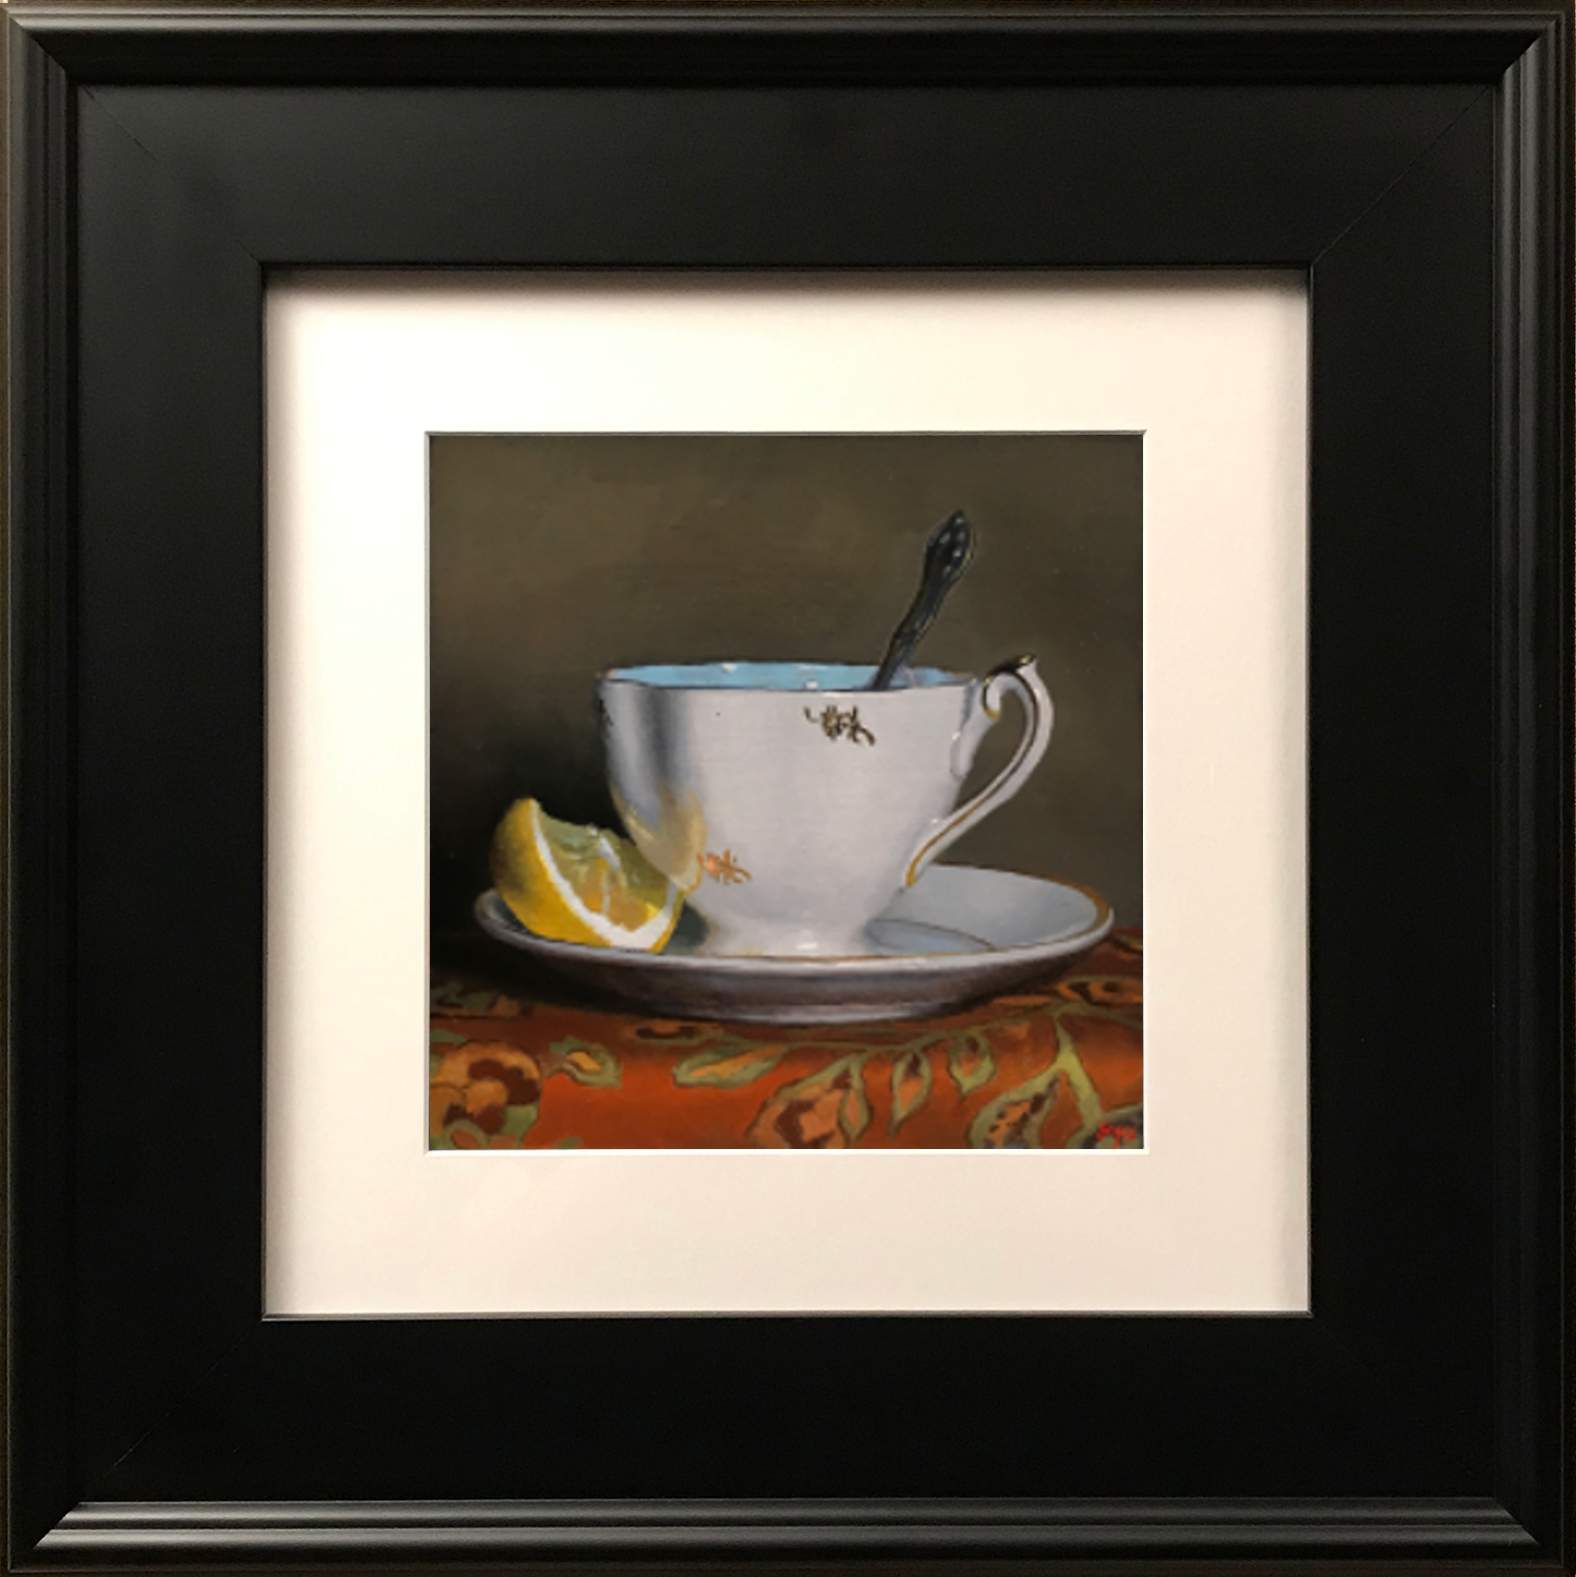 "Teacup and Lemon Slice"Prints are available